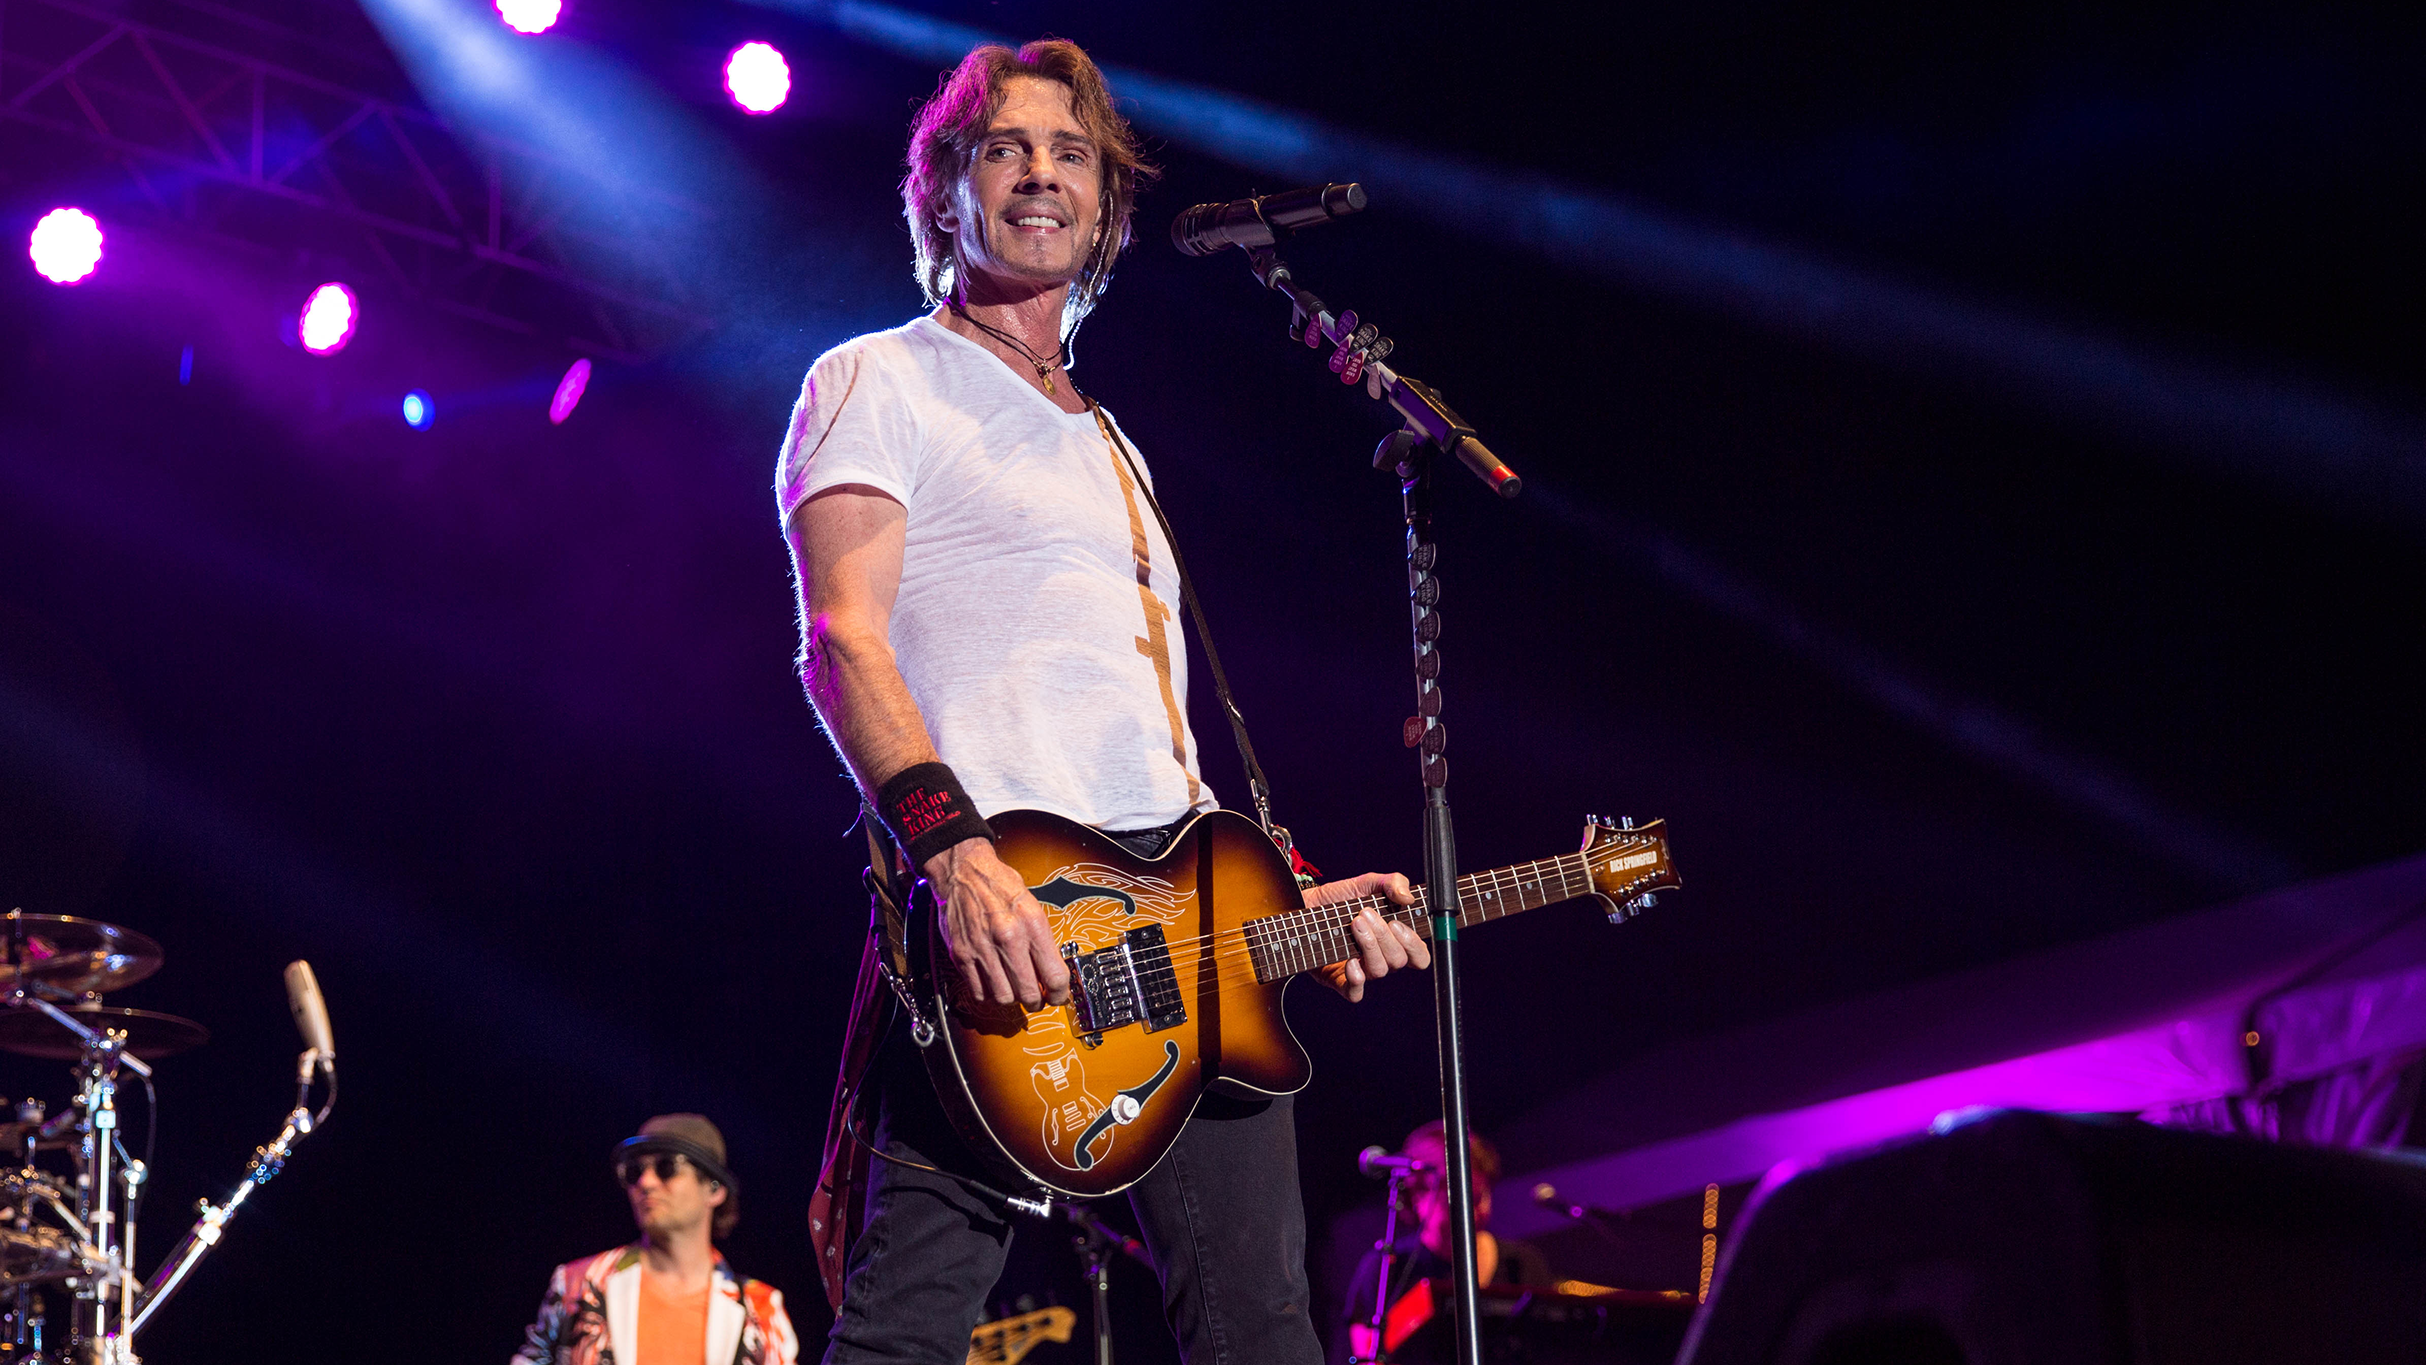 An Acoustic Evening With Rick Springfield & Richard Marx free presale code for event tickets in Biloxi, MS (IP Casino Resort and Spa)